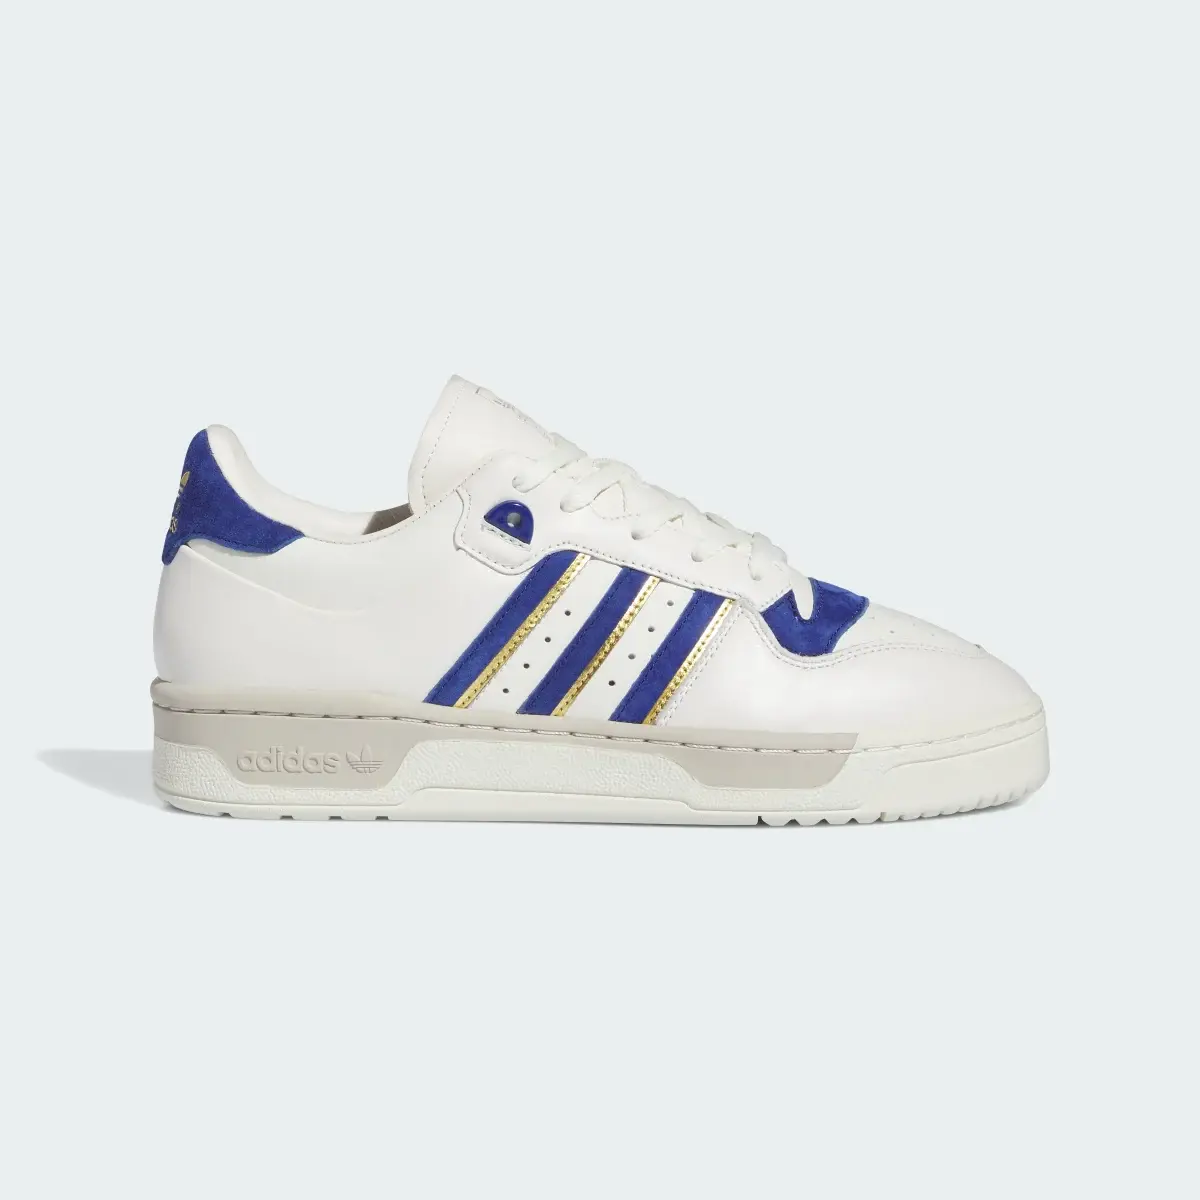 Adidas Rivalry 86 Low Schuh. 2